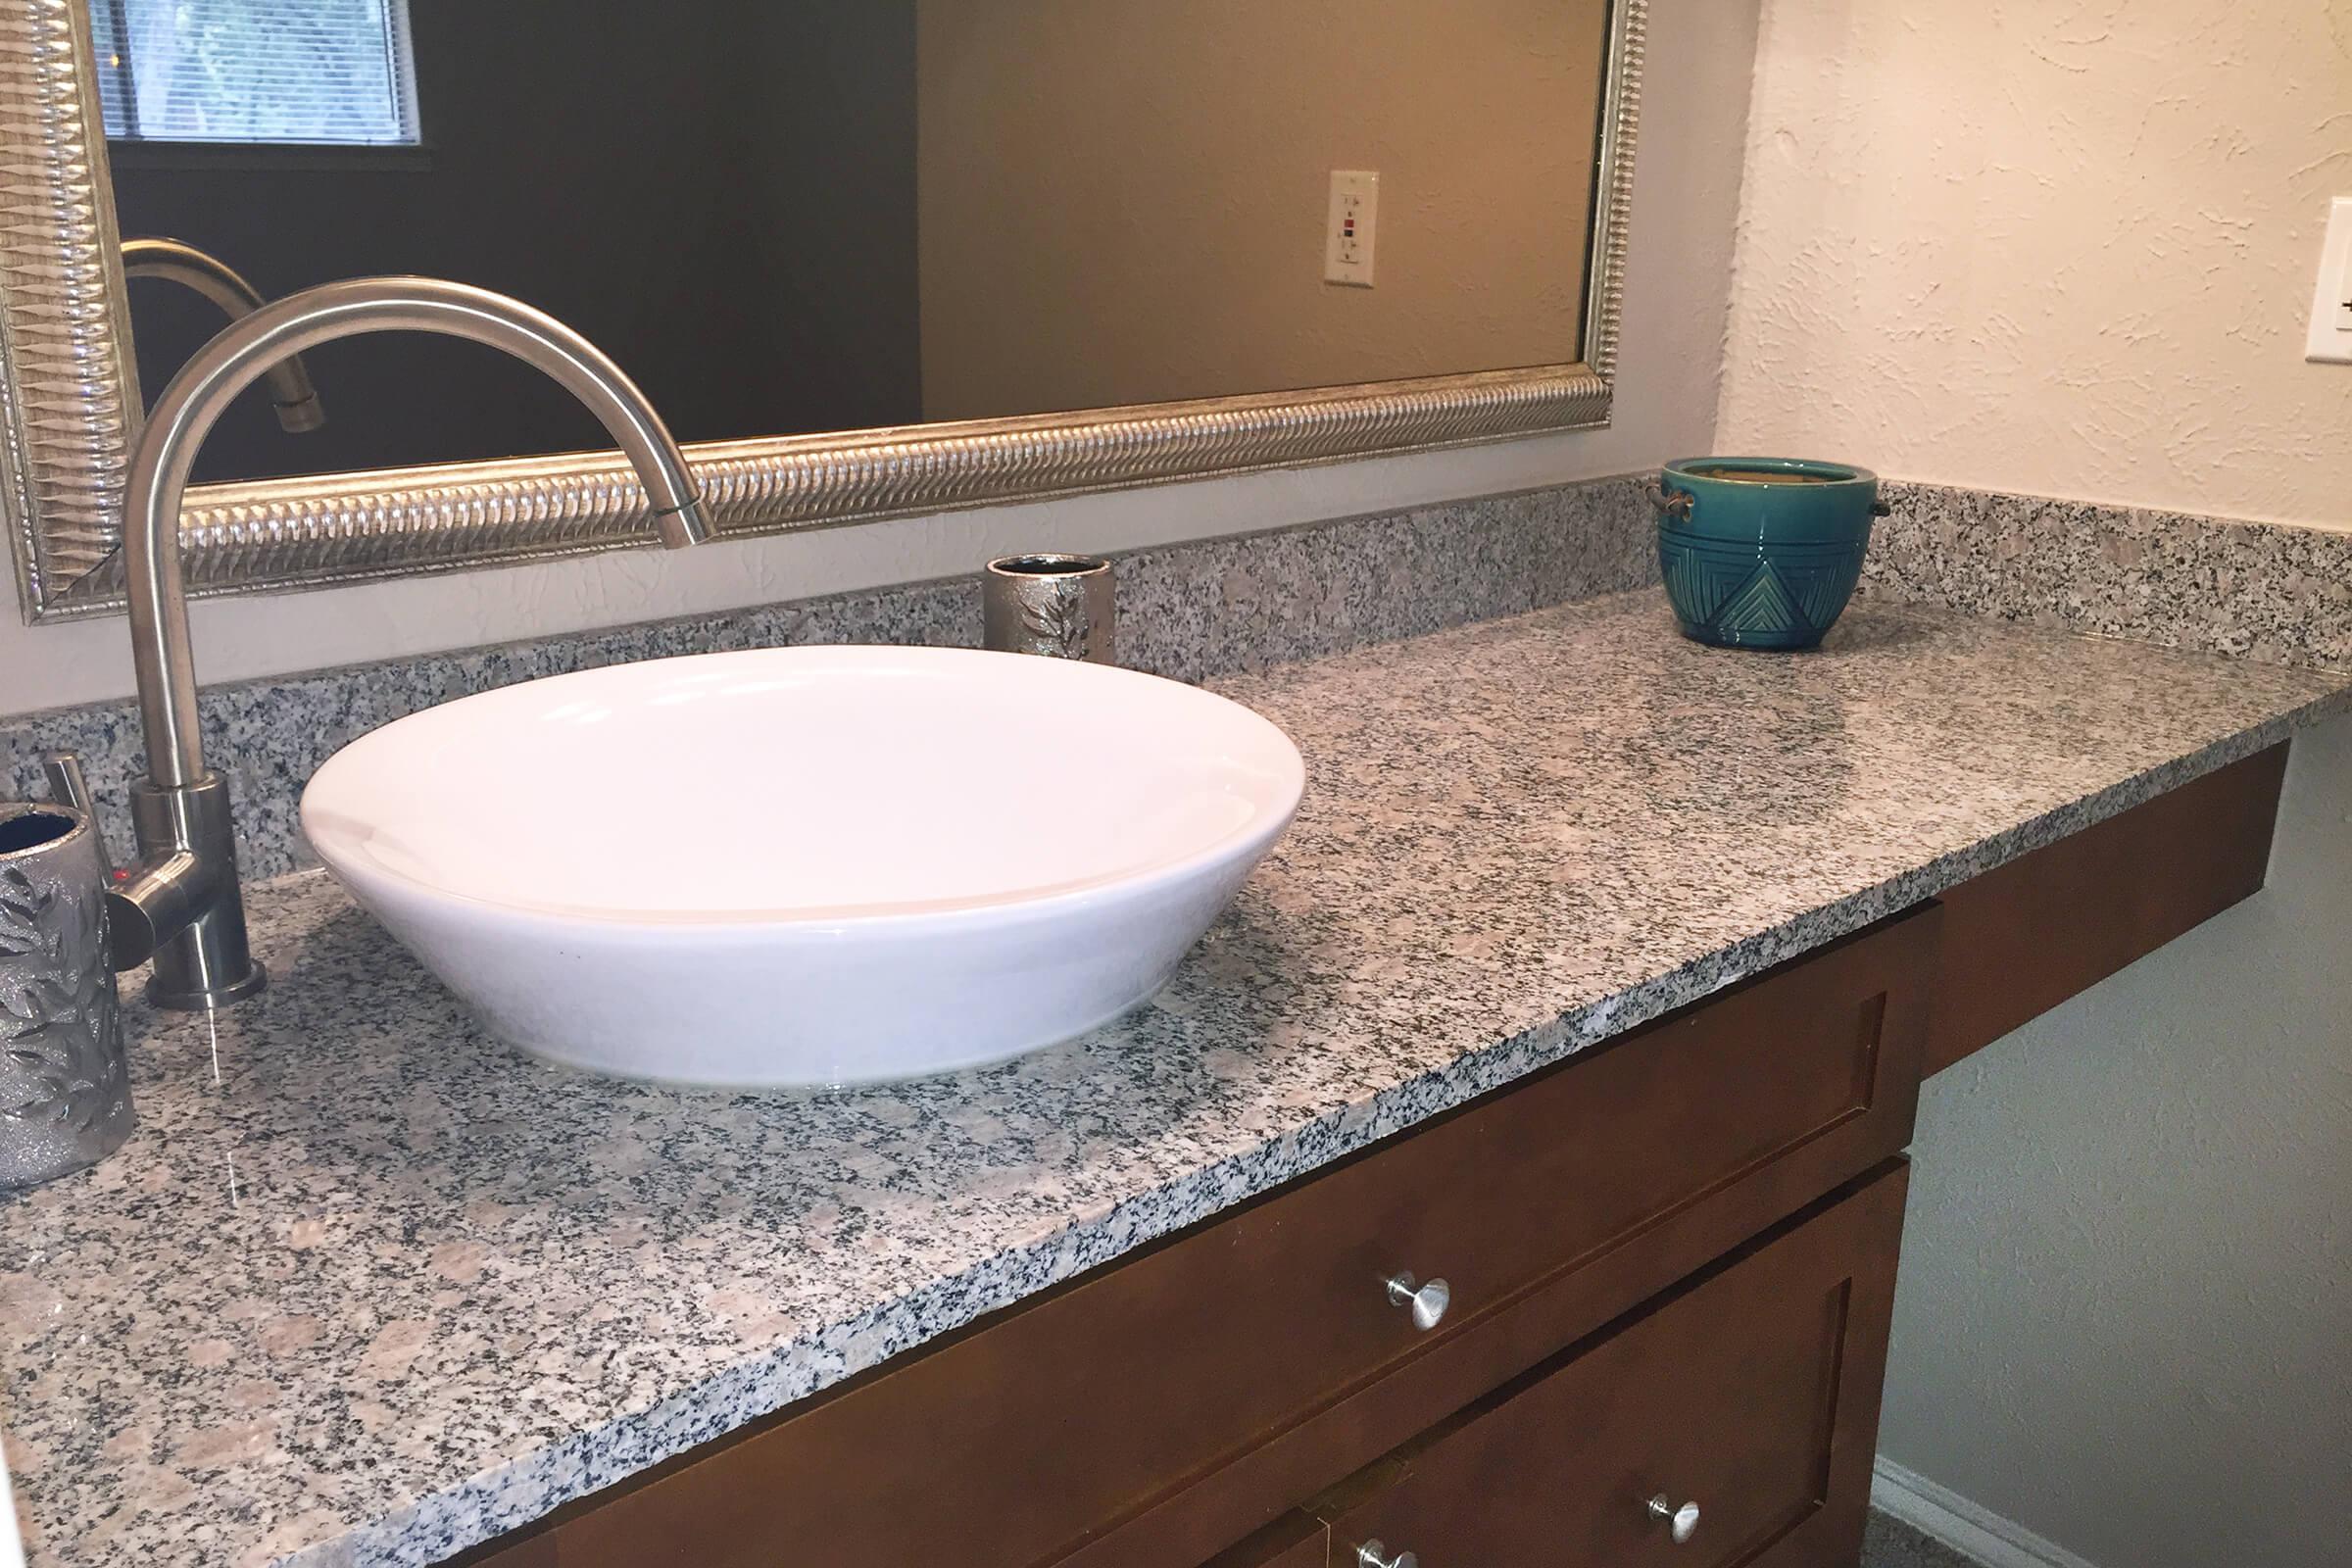 a close up of a bowl sink on a counter